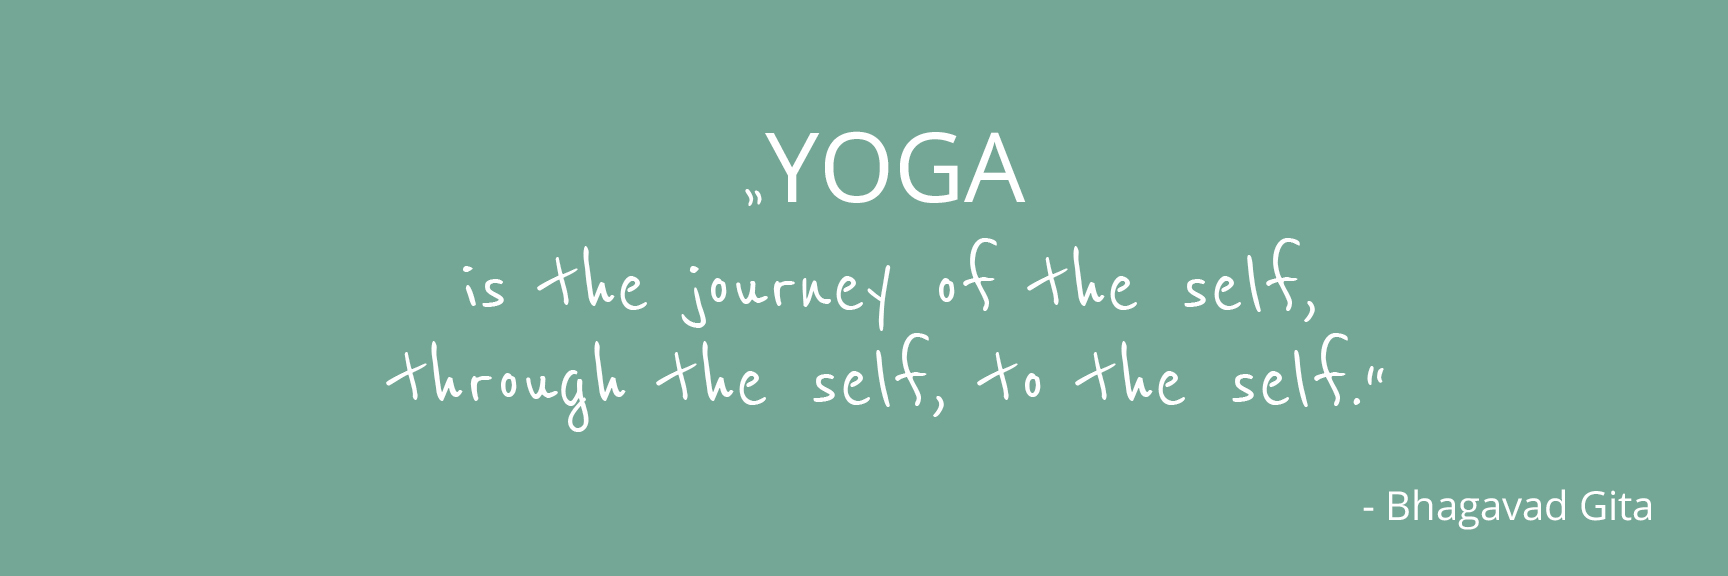 Yoga Zitat. Yoga - It's a work IN, not a work out.